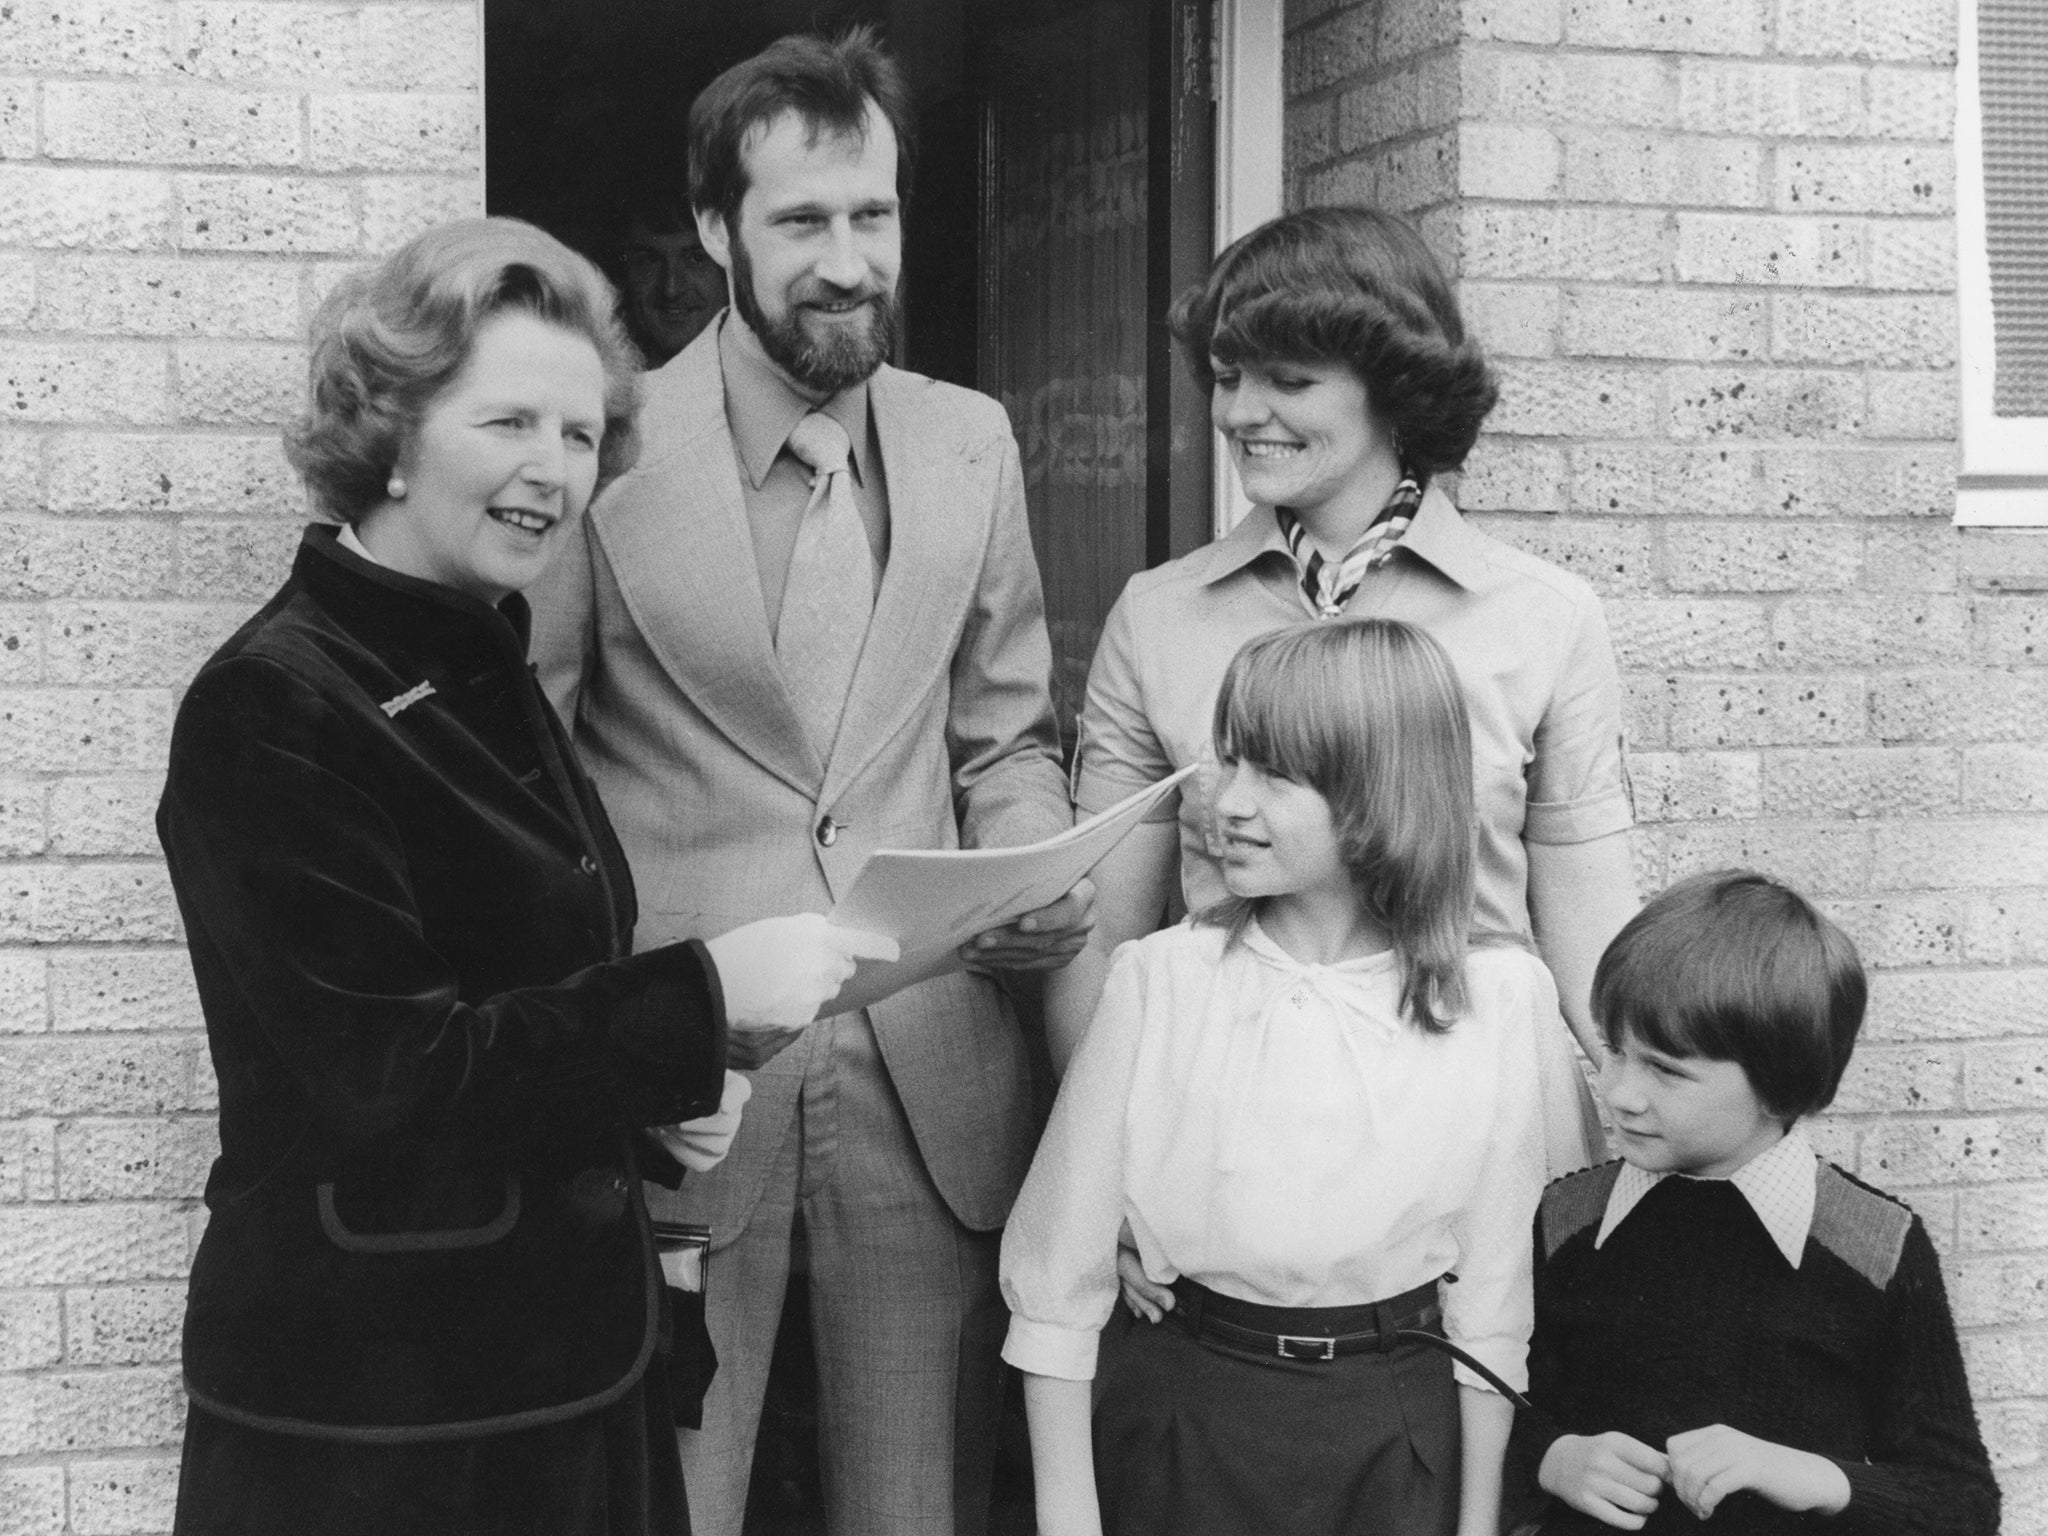 Margaret Thatcher introduced the Right to Buy scheme in 1979